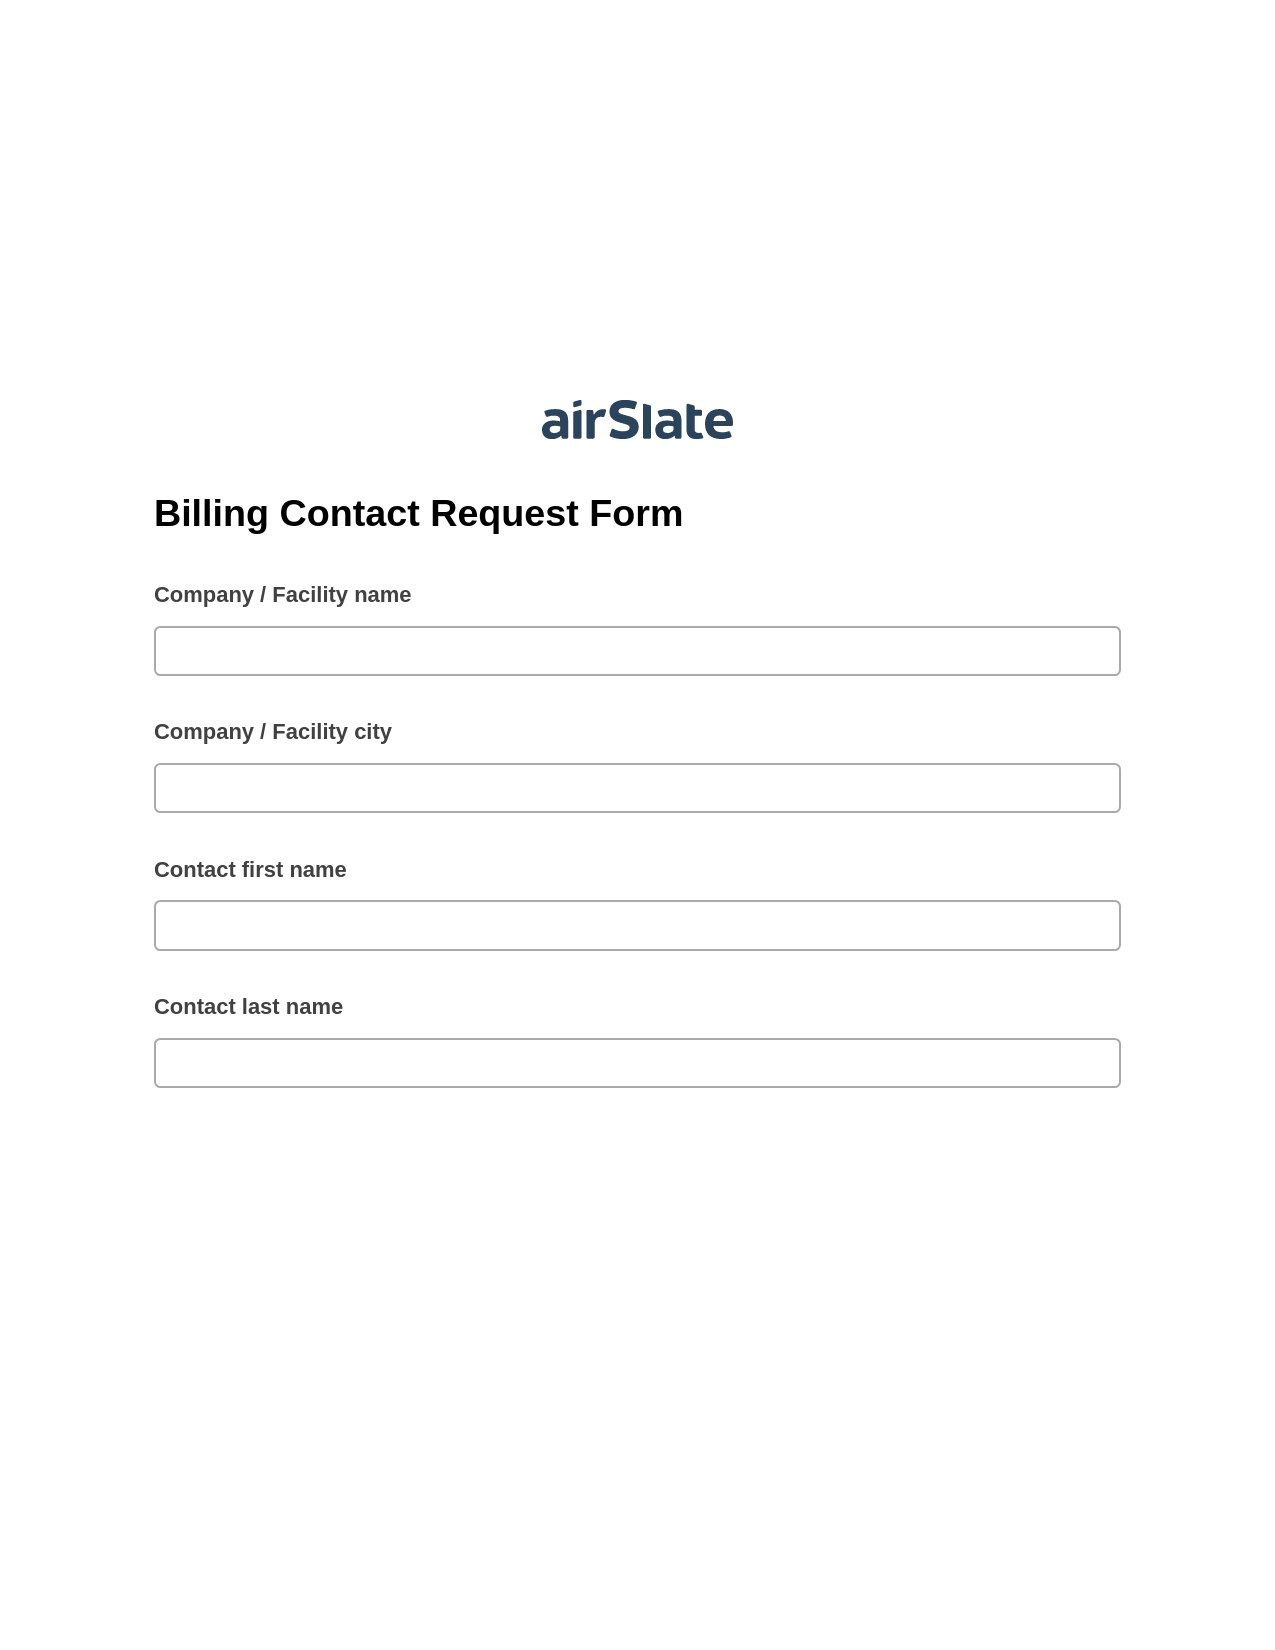 Multirole Billing Contact Request Form Pre-fill Dropdowns from Google Sheet Bot, Hide Signatures Bot, Box Bot